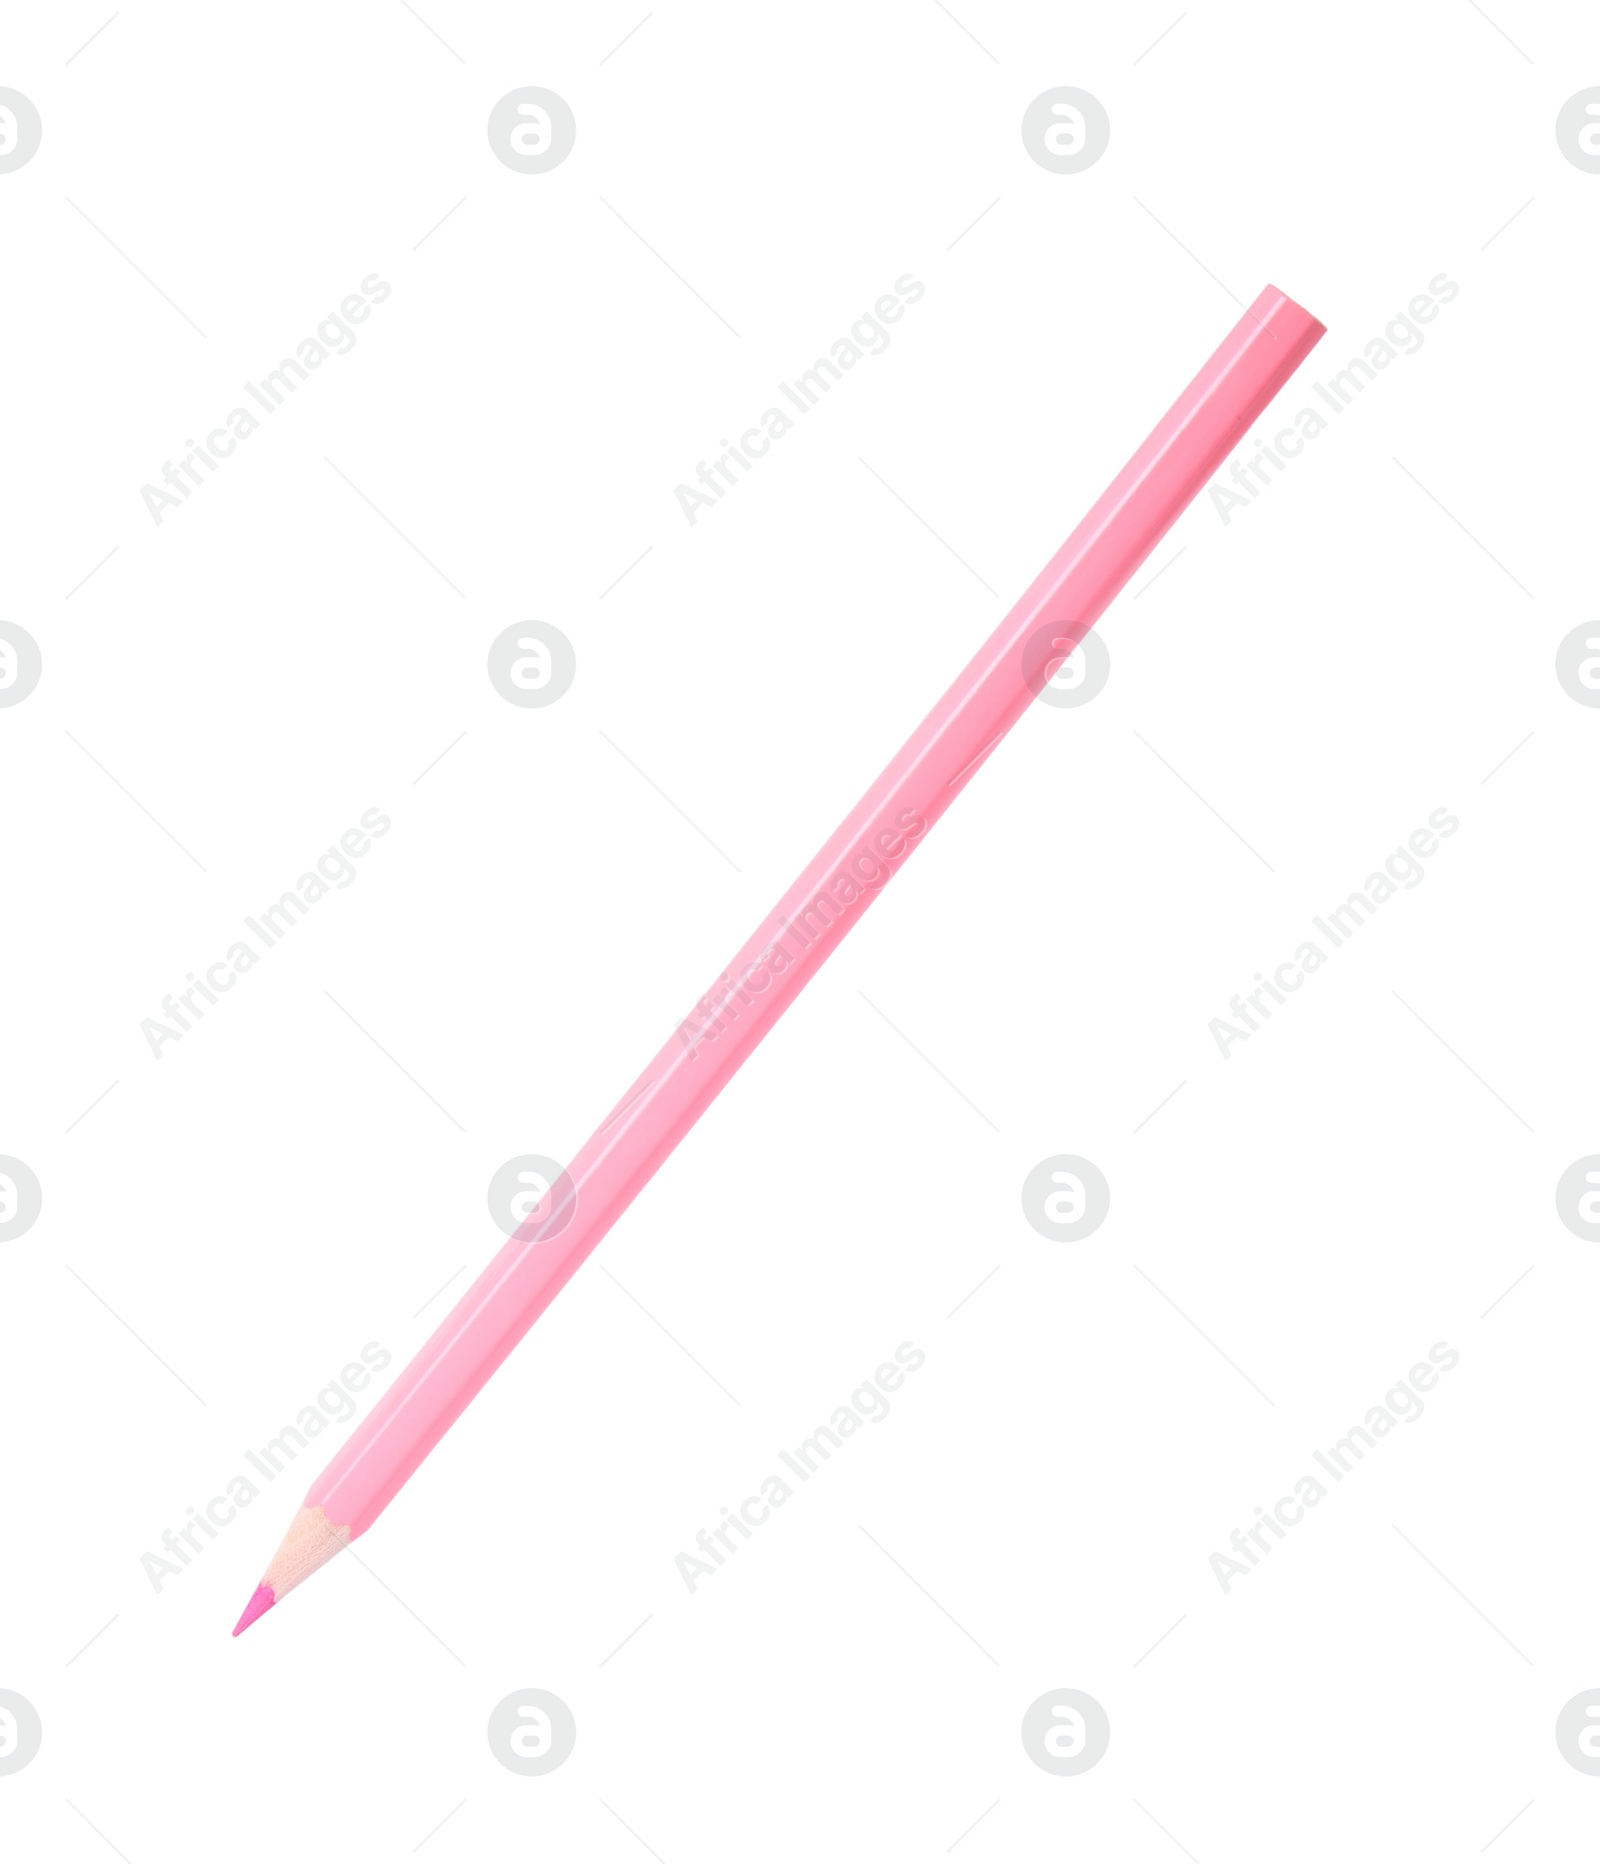 Photo of Pink wooden pencil on white background. School stationery